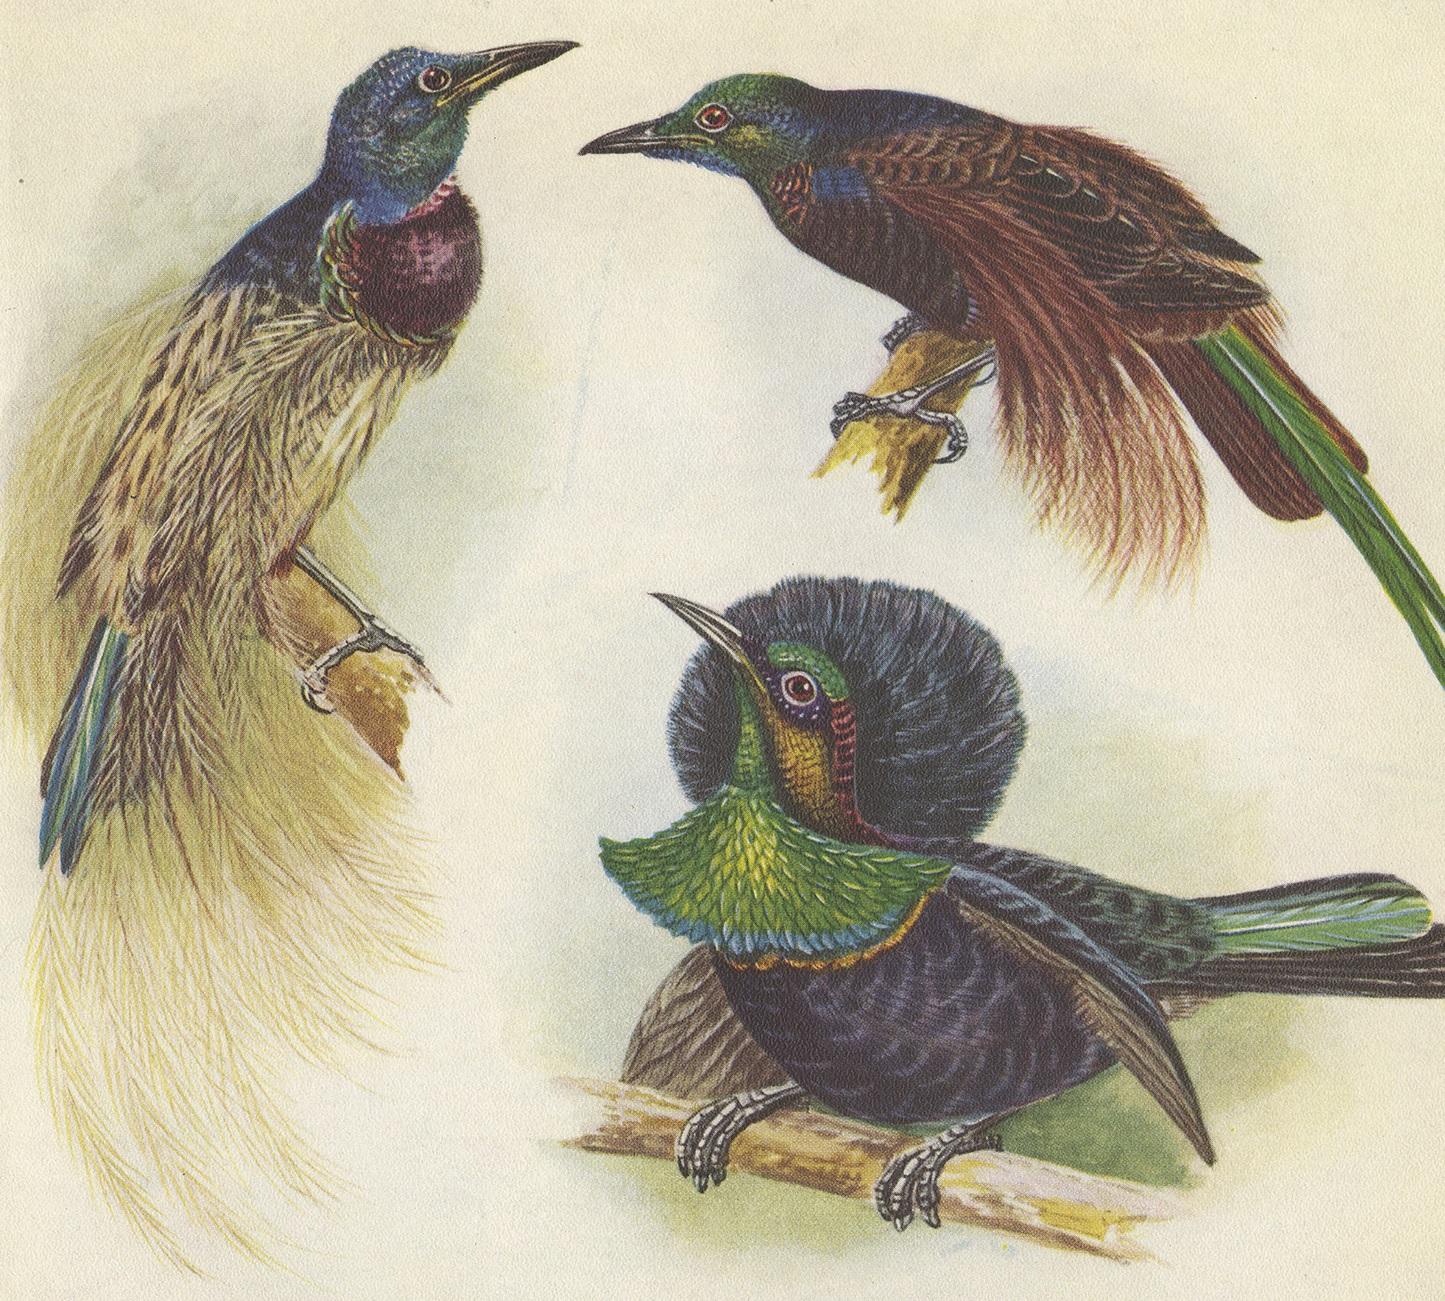 Decorative print illustrating the bensbach's rifle bird, reichenow's wonderful rifle bird, duivenbode's rifle bird and mantou's rifle bird. This authentic print originates from 'birds of paradise and bower birds' by Ttom Iredale. With colored